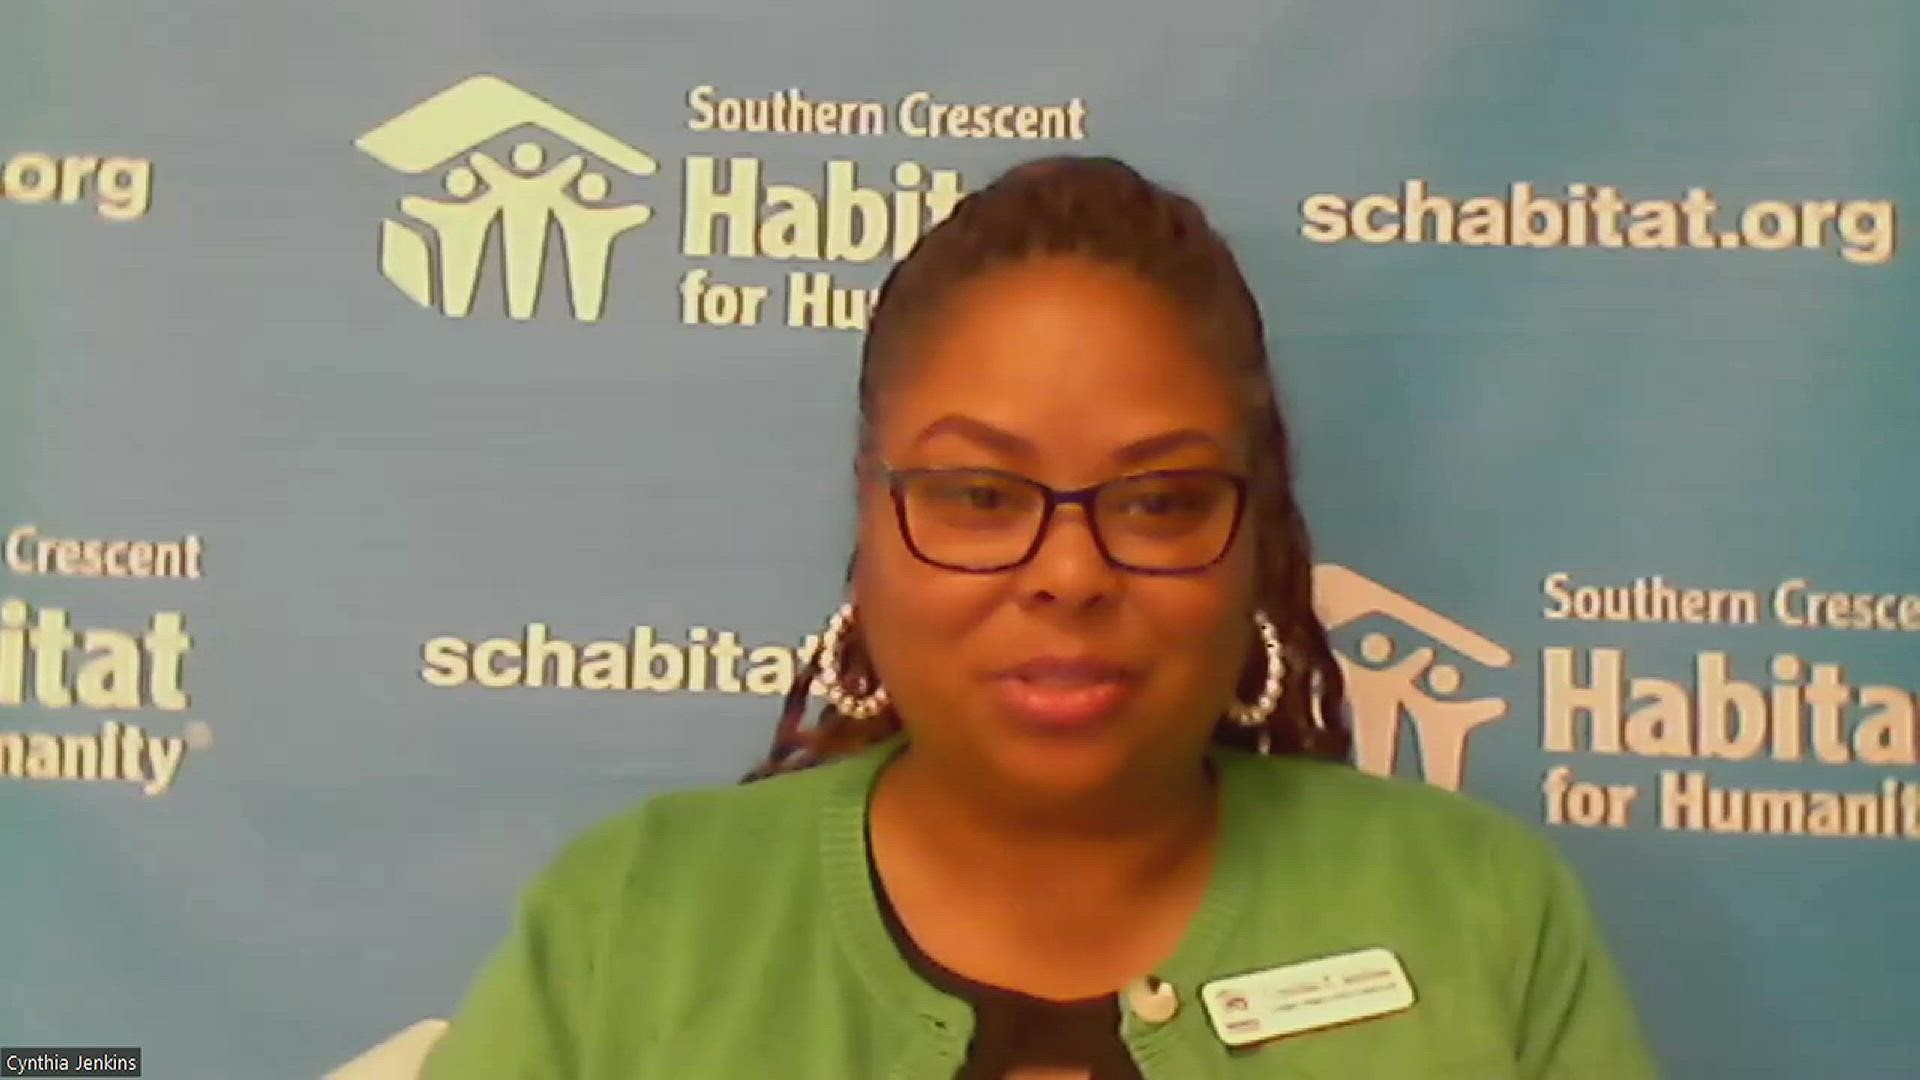 Cynthia Jenkins, the CEO and President at Southern Crescent Habitat tells 11Alive that the donation was a complete surprise.